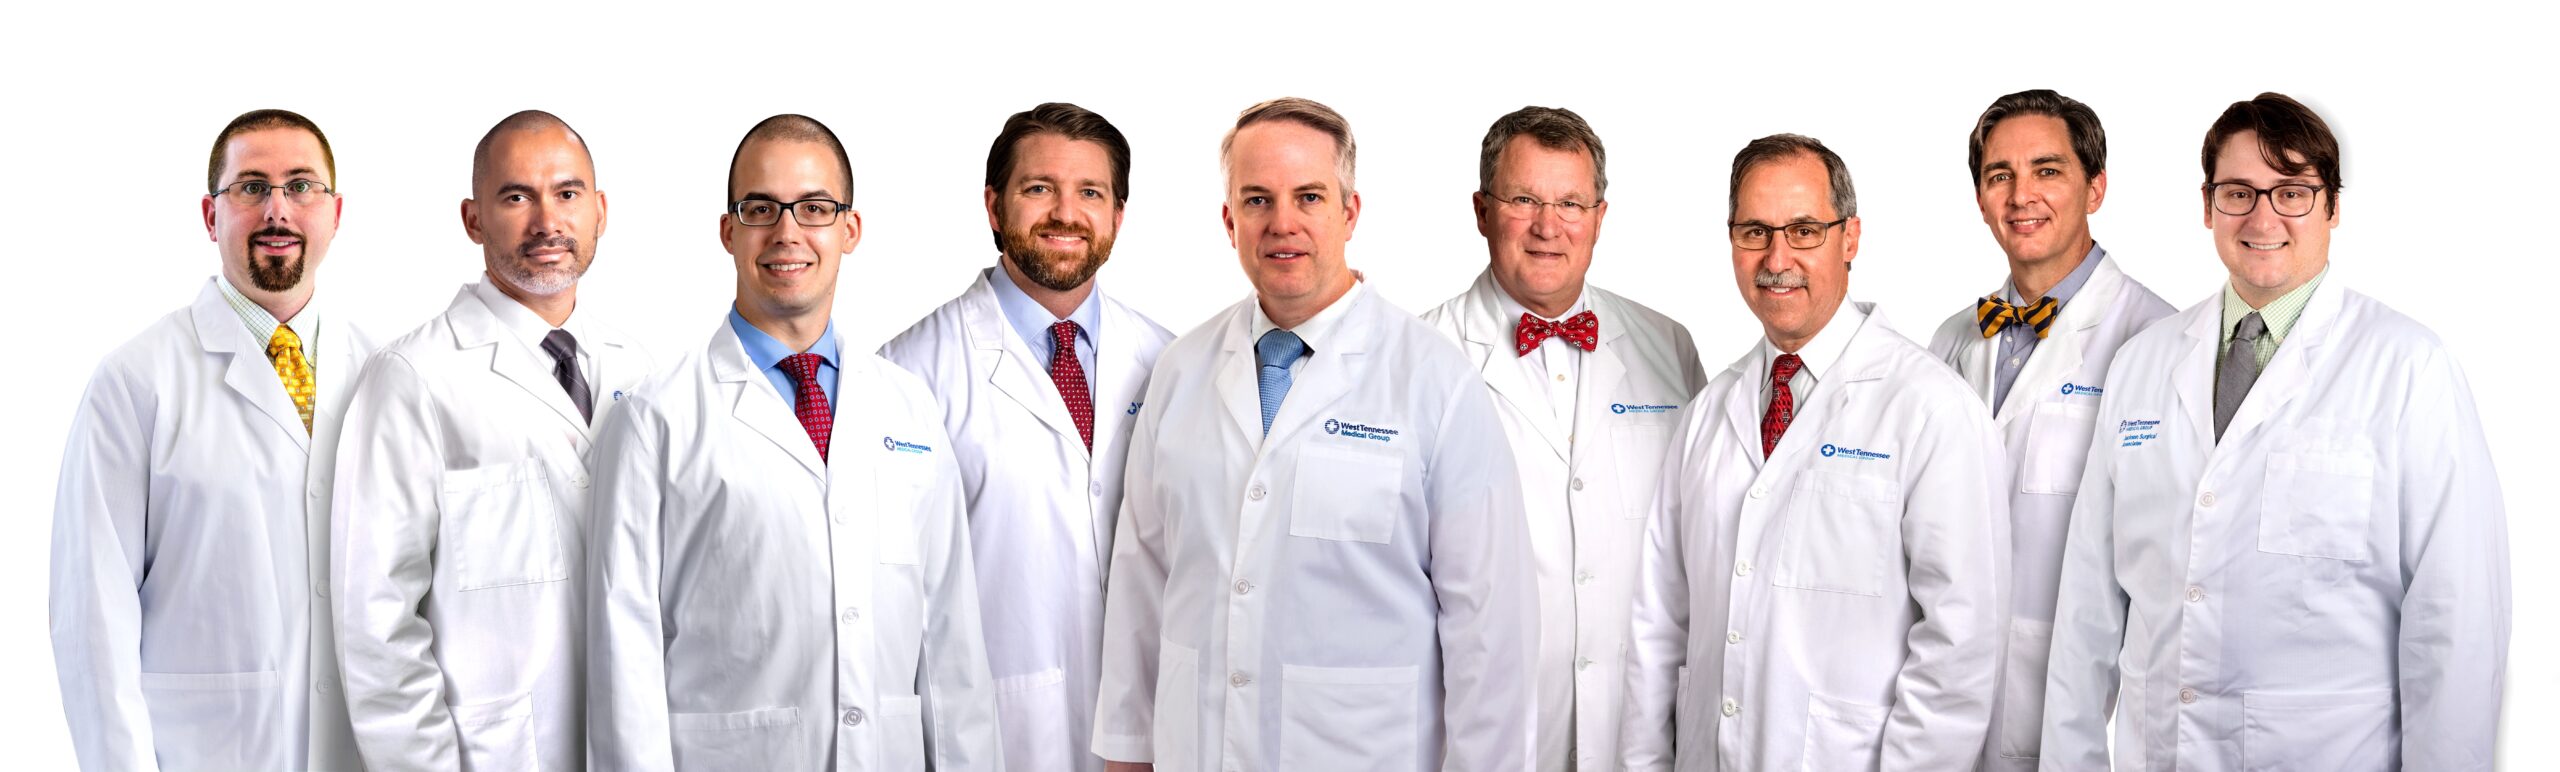 Group photo of all of the Jackson Surgical Associates physicians.